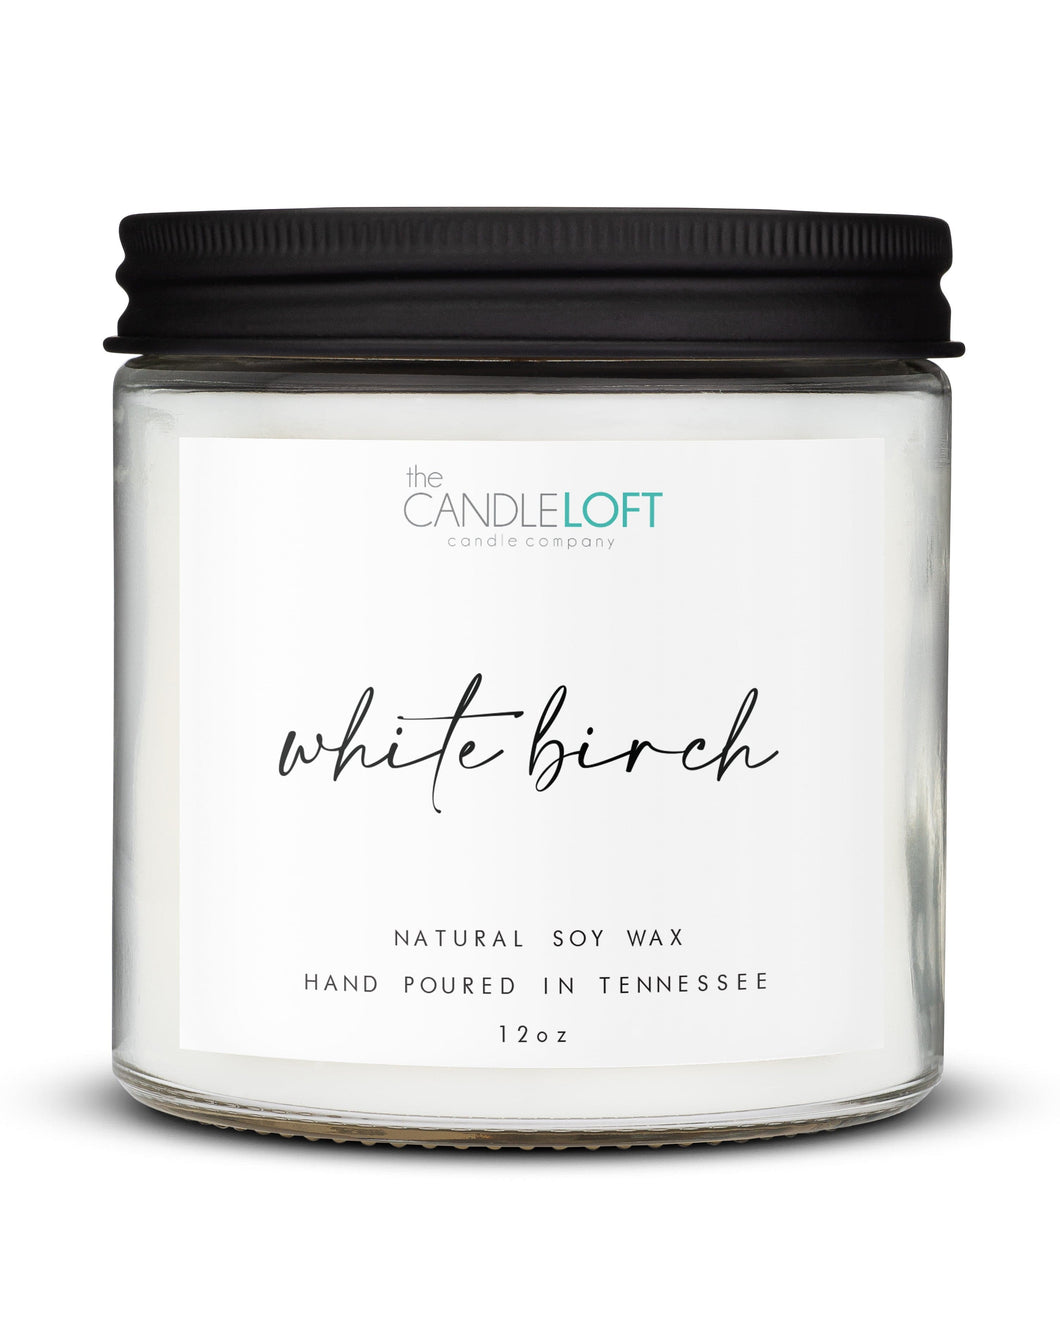 The Candle Loft Candles Signature 12oz White Birch Candle